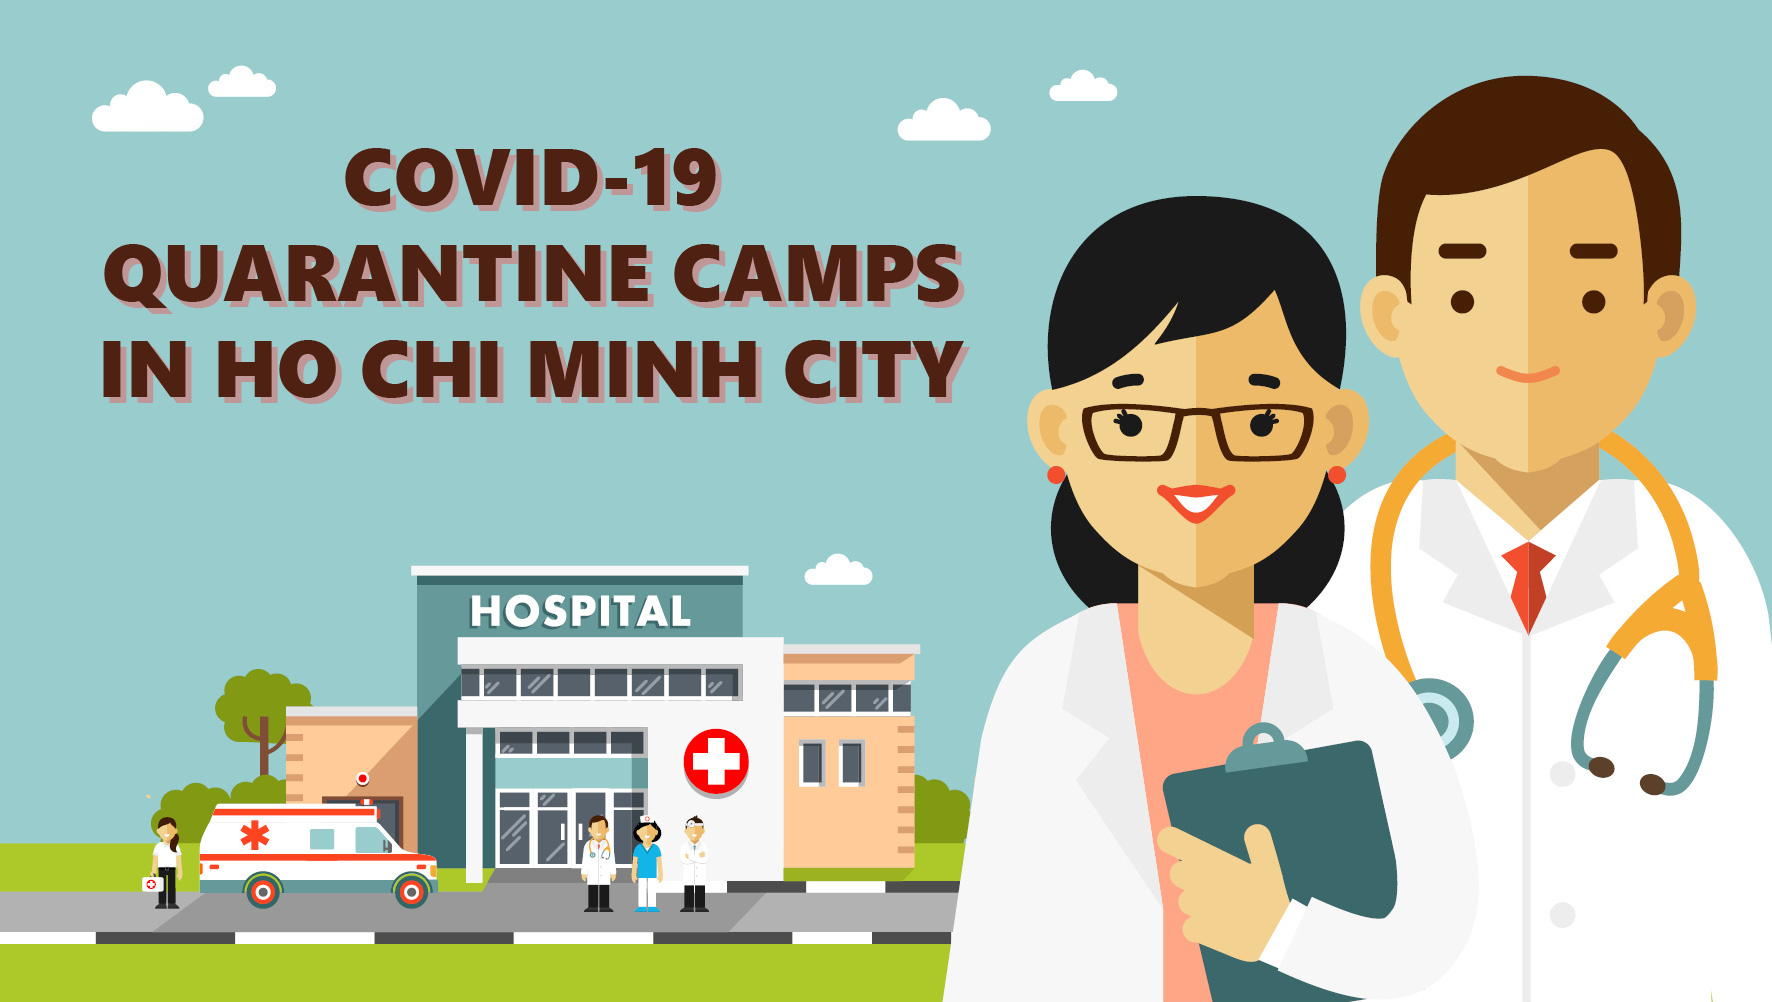 A list of COVID-19 quarantine camps in Ho Chi Minh City